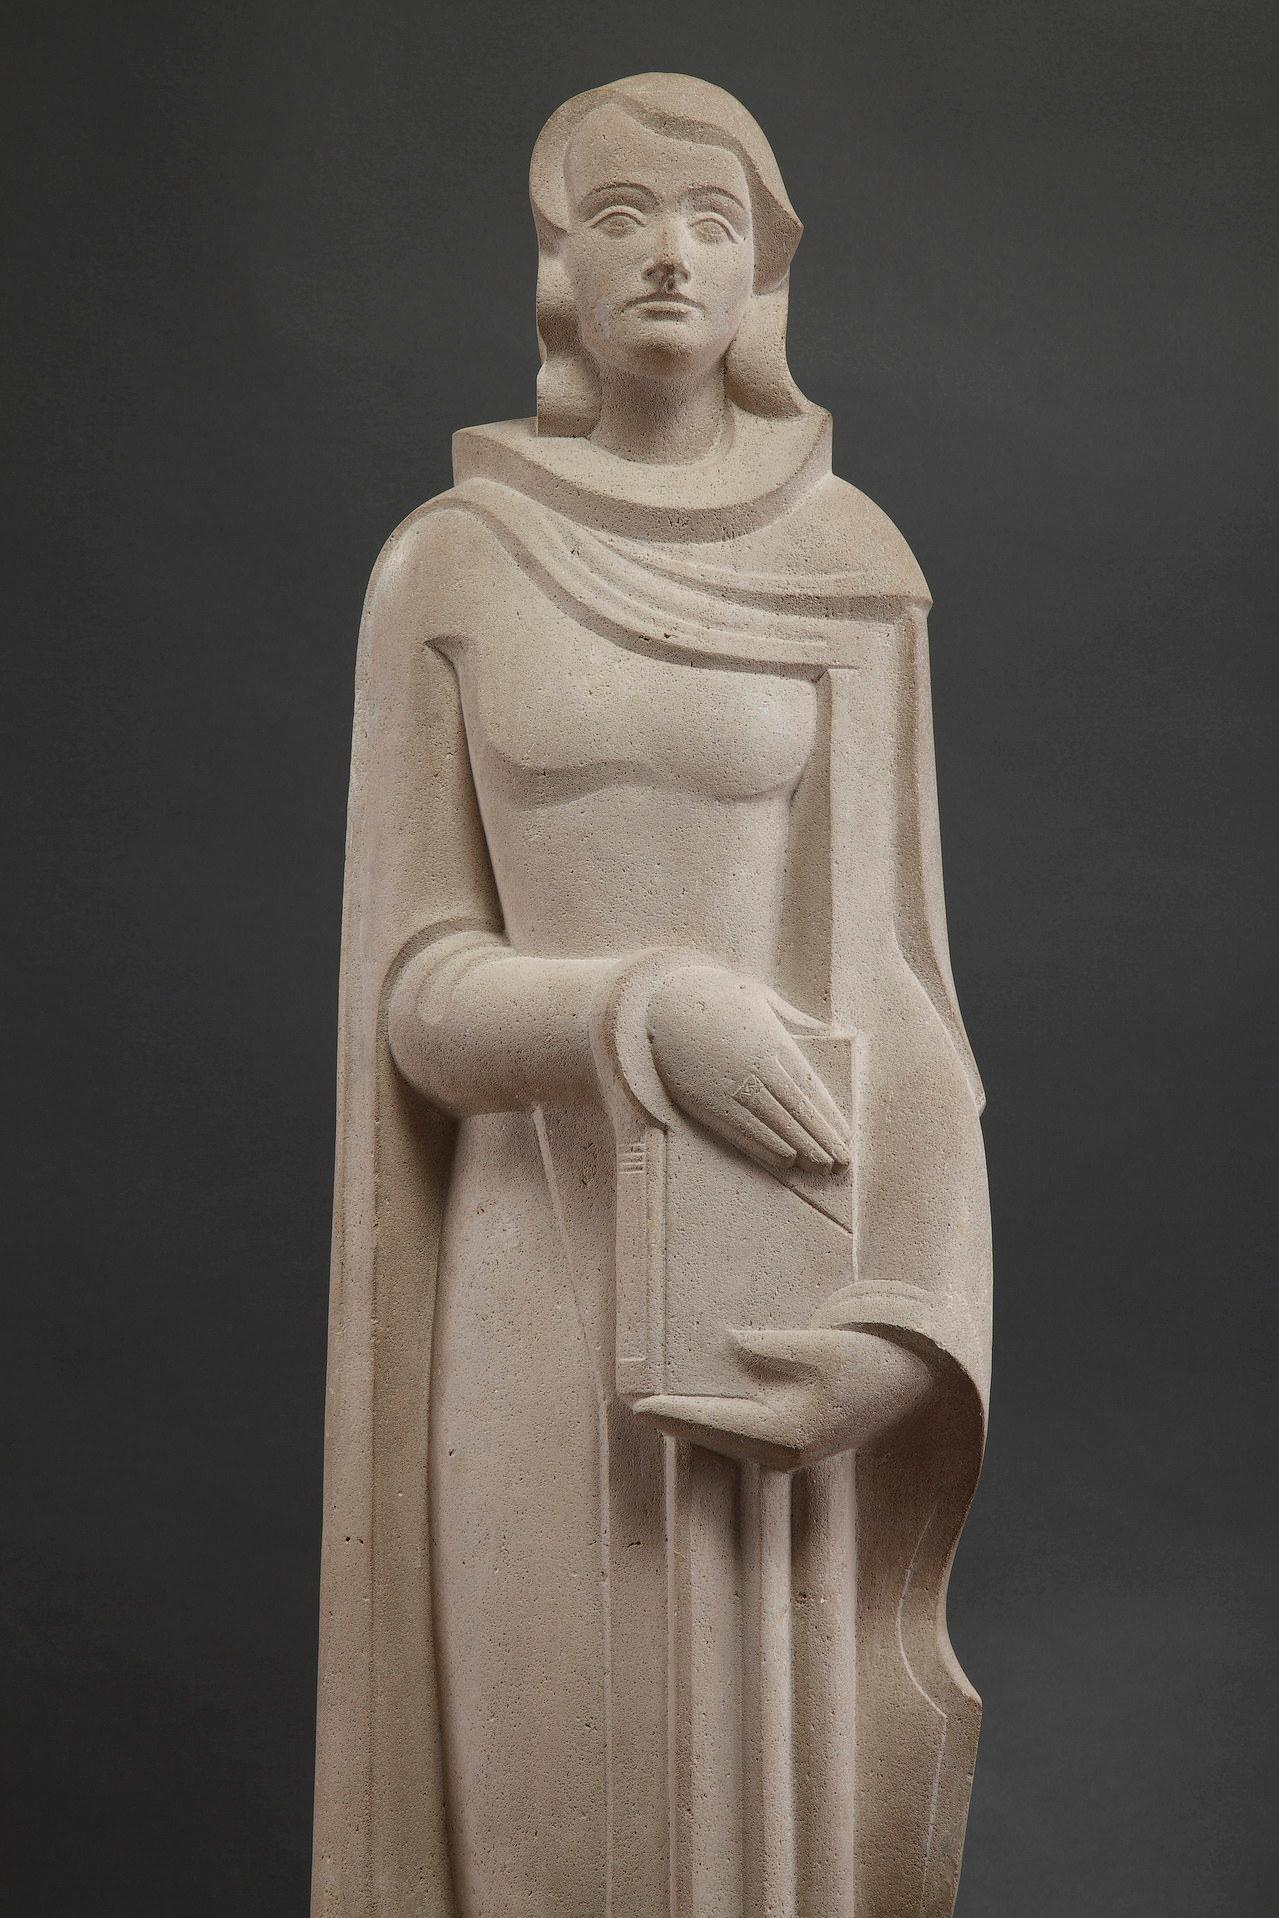 Lady with a book - Sculpture by Jan and Joël MARTEL